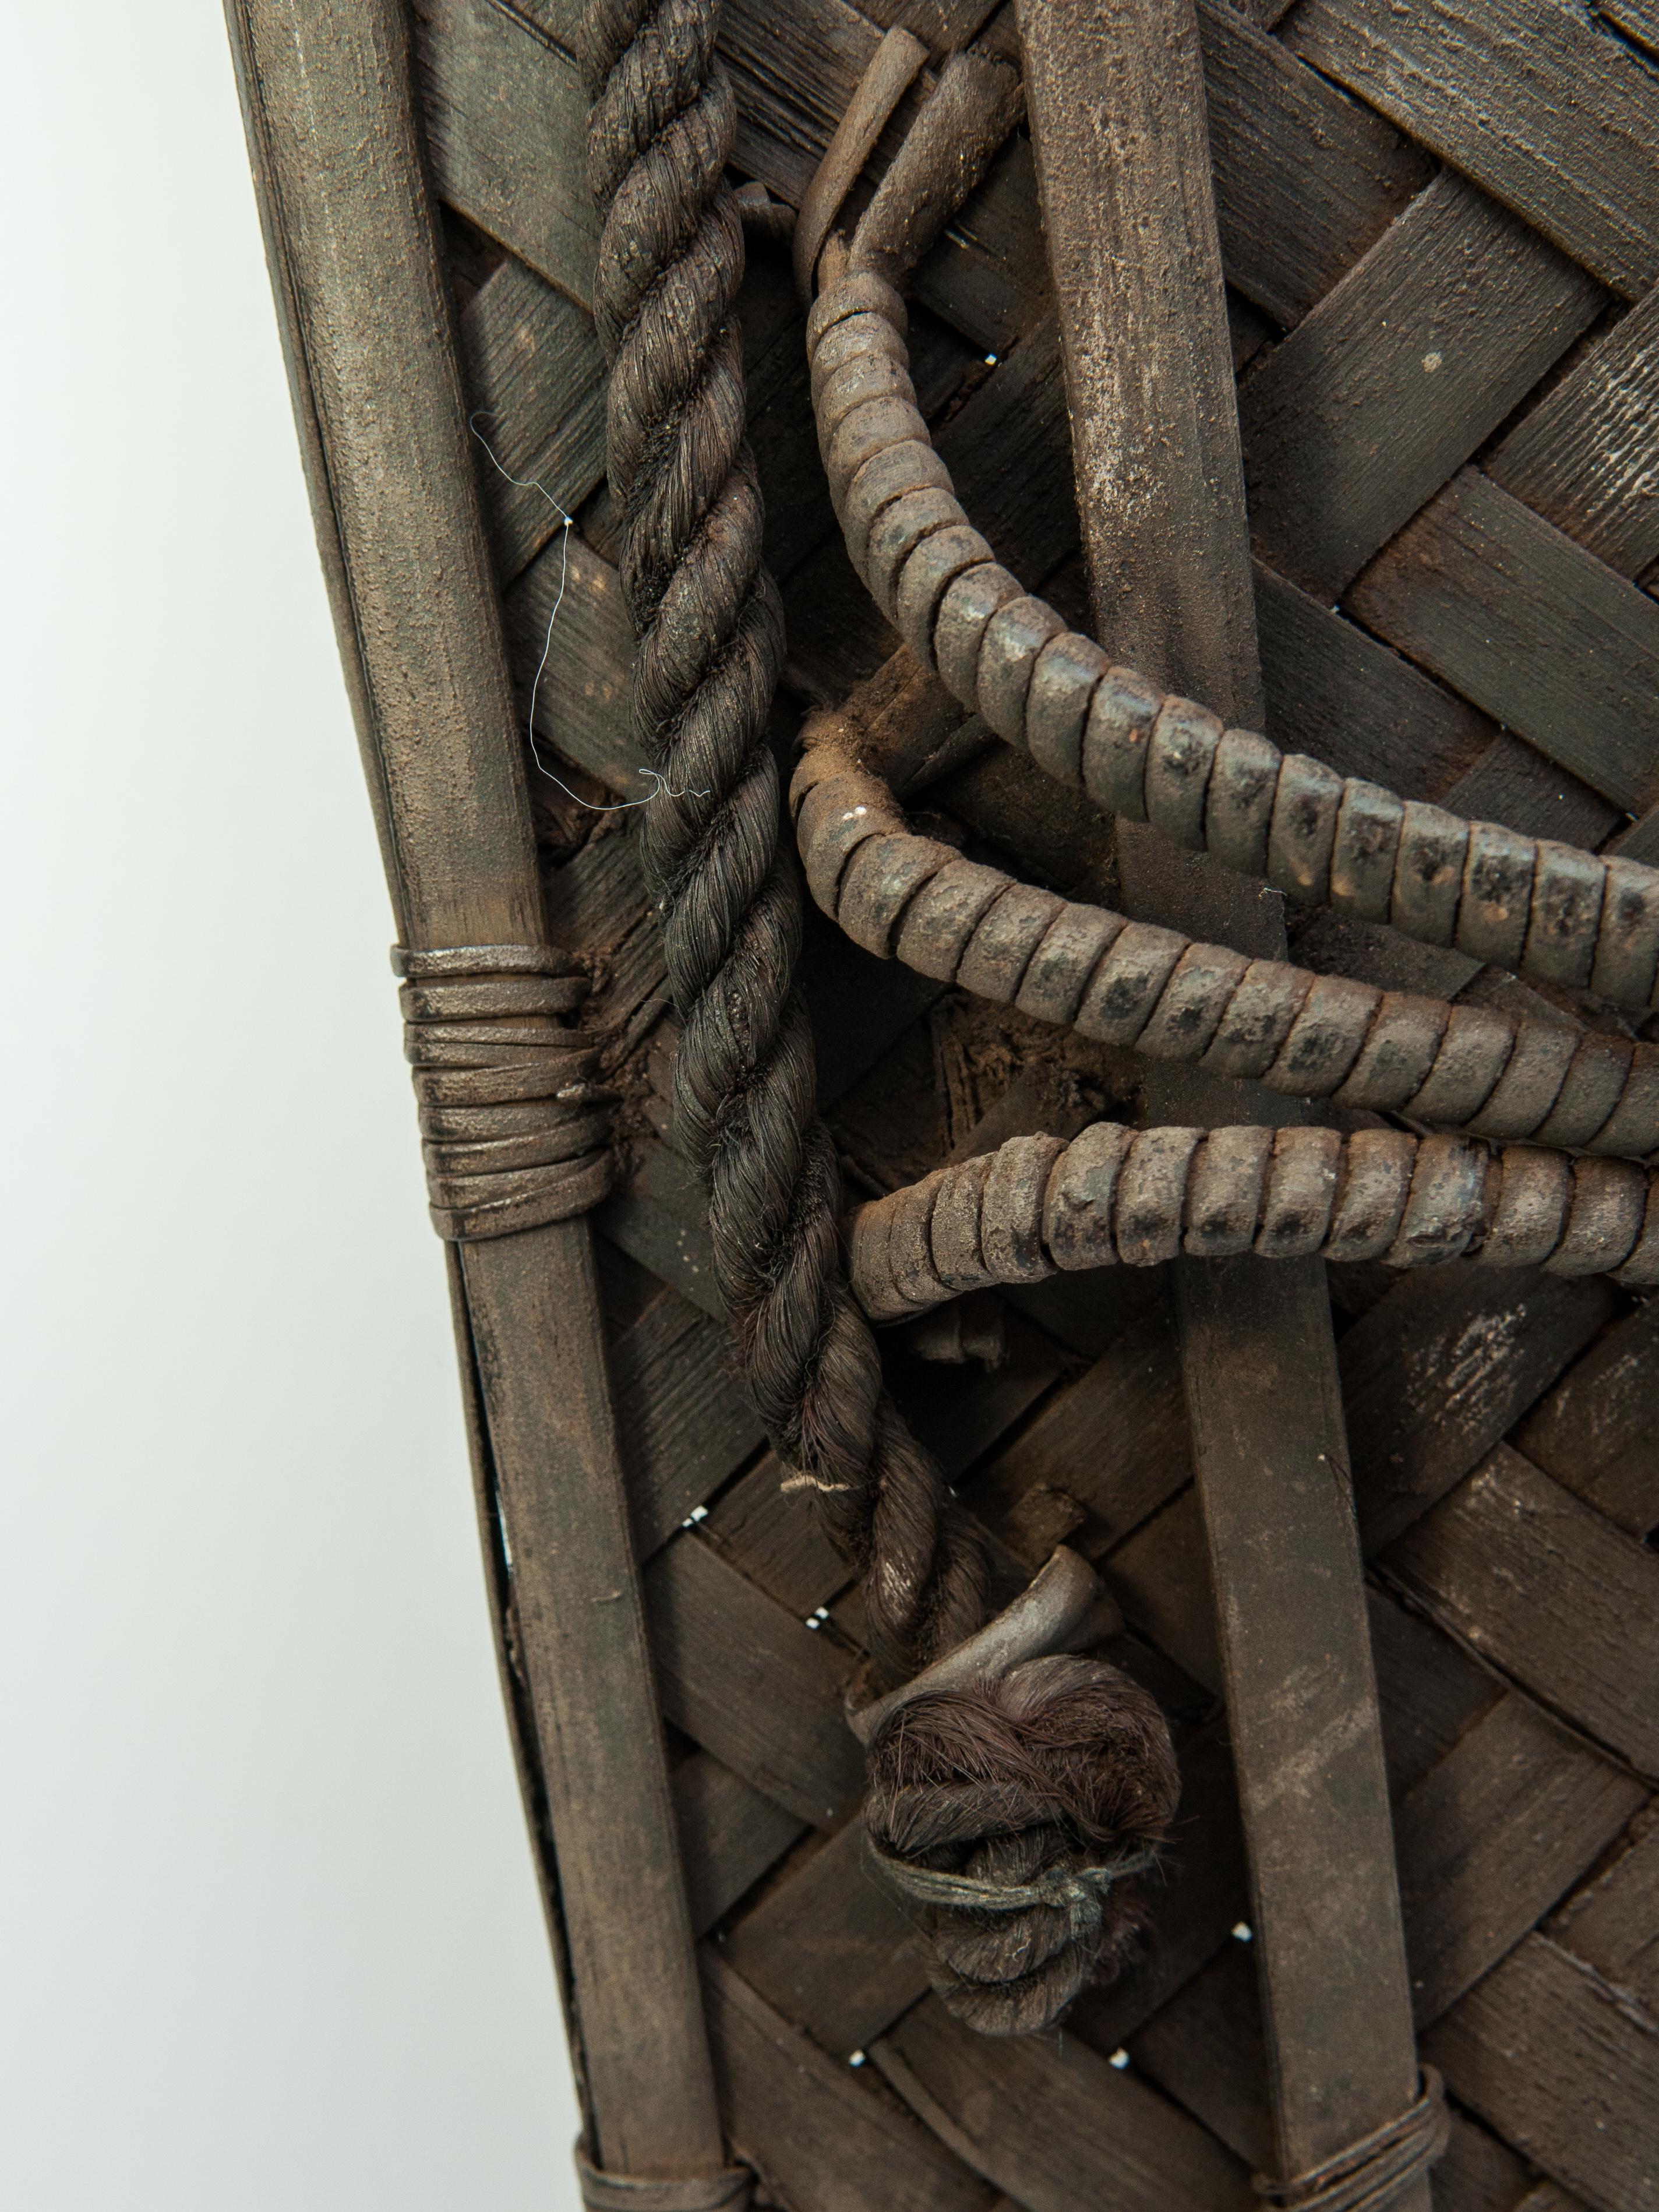 Indian Vintage Tribal Shield Cane & Bamboo Nagaland, Northeast India. Mid-20th Century.